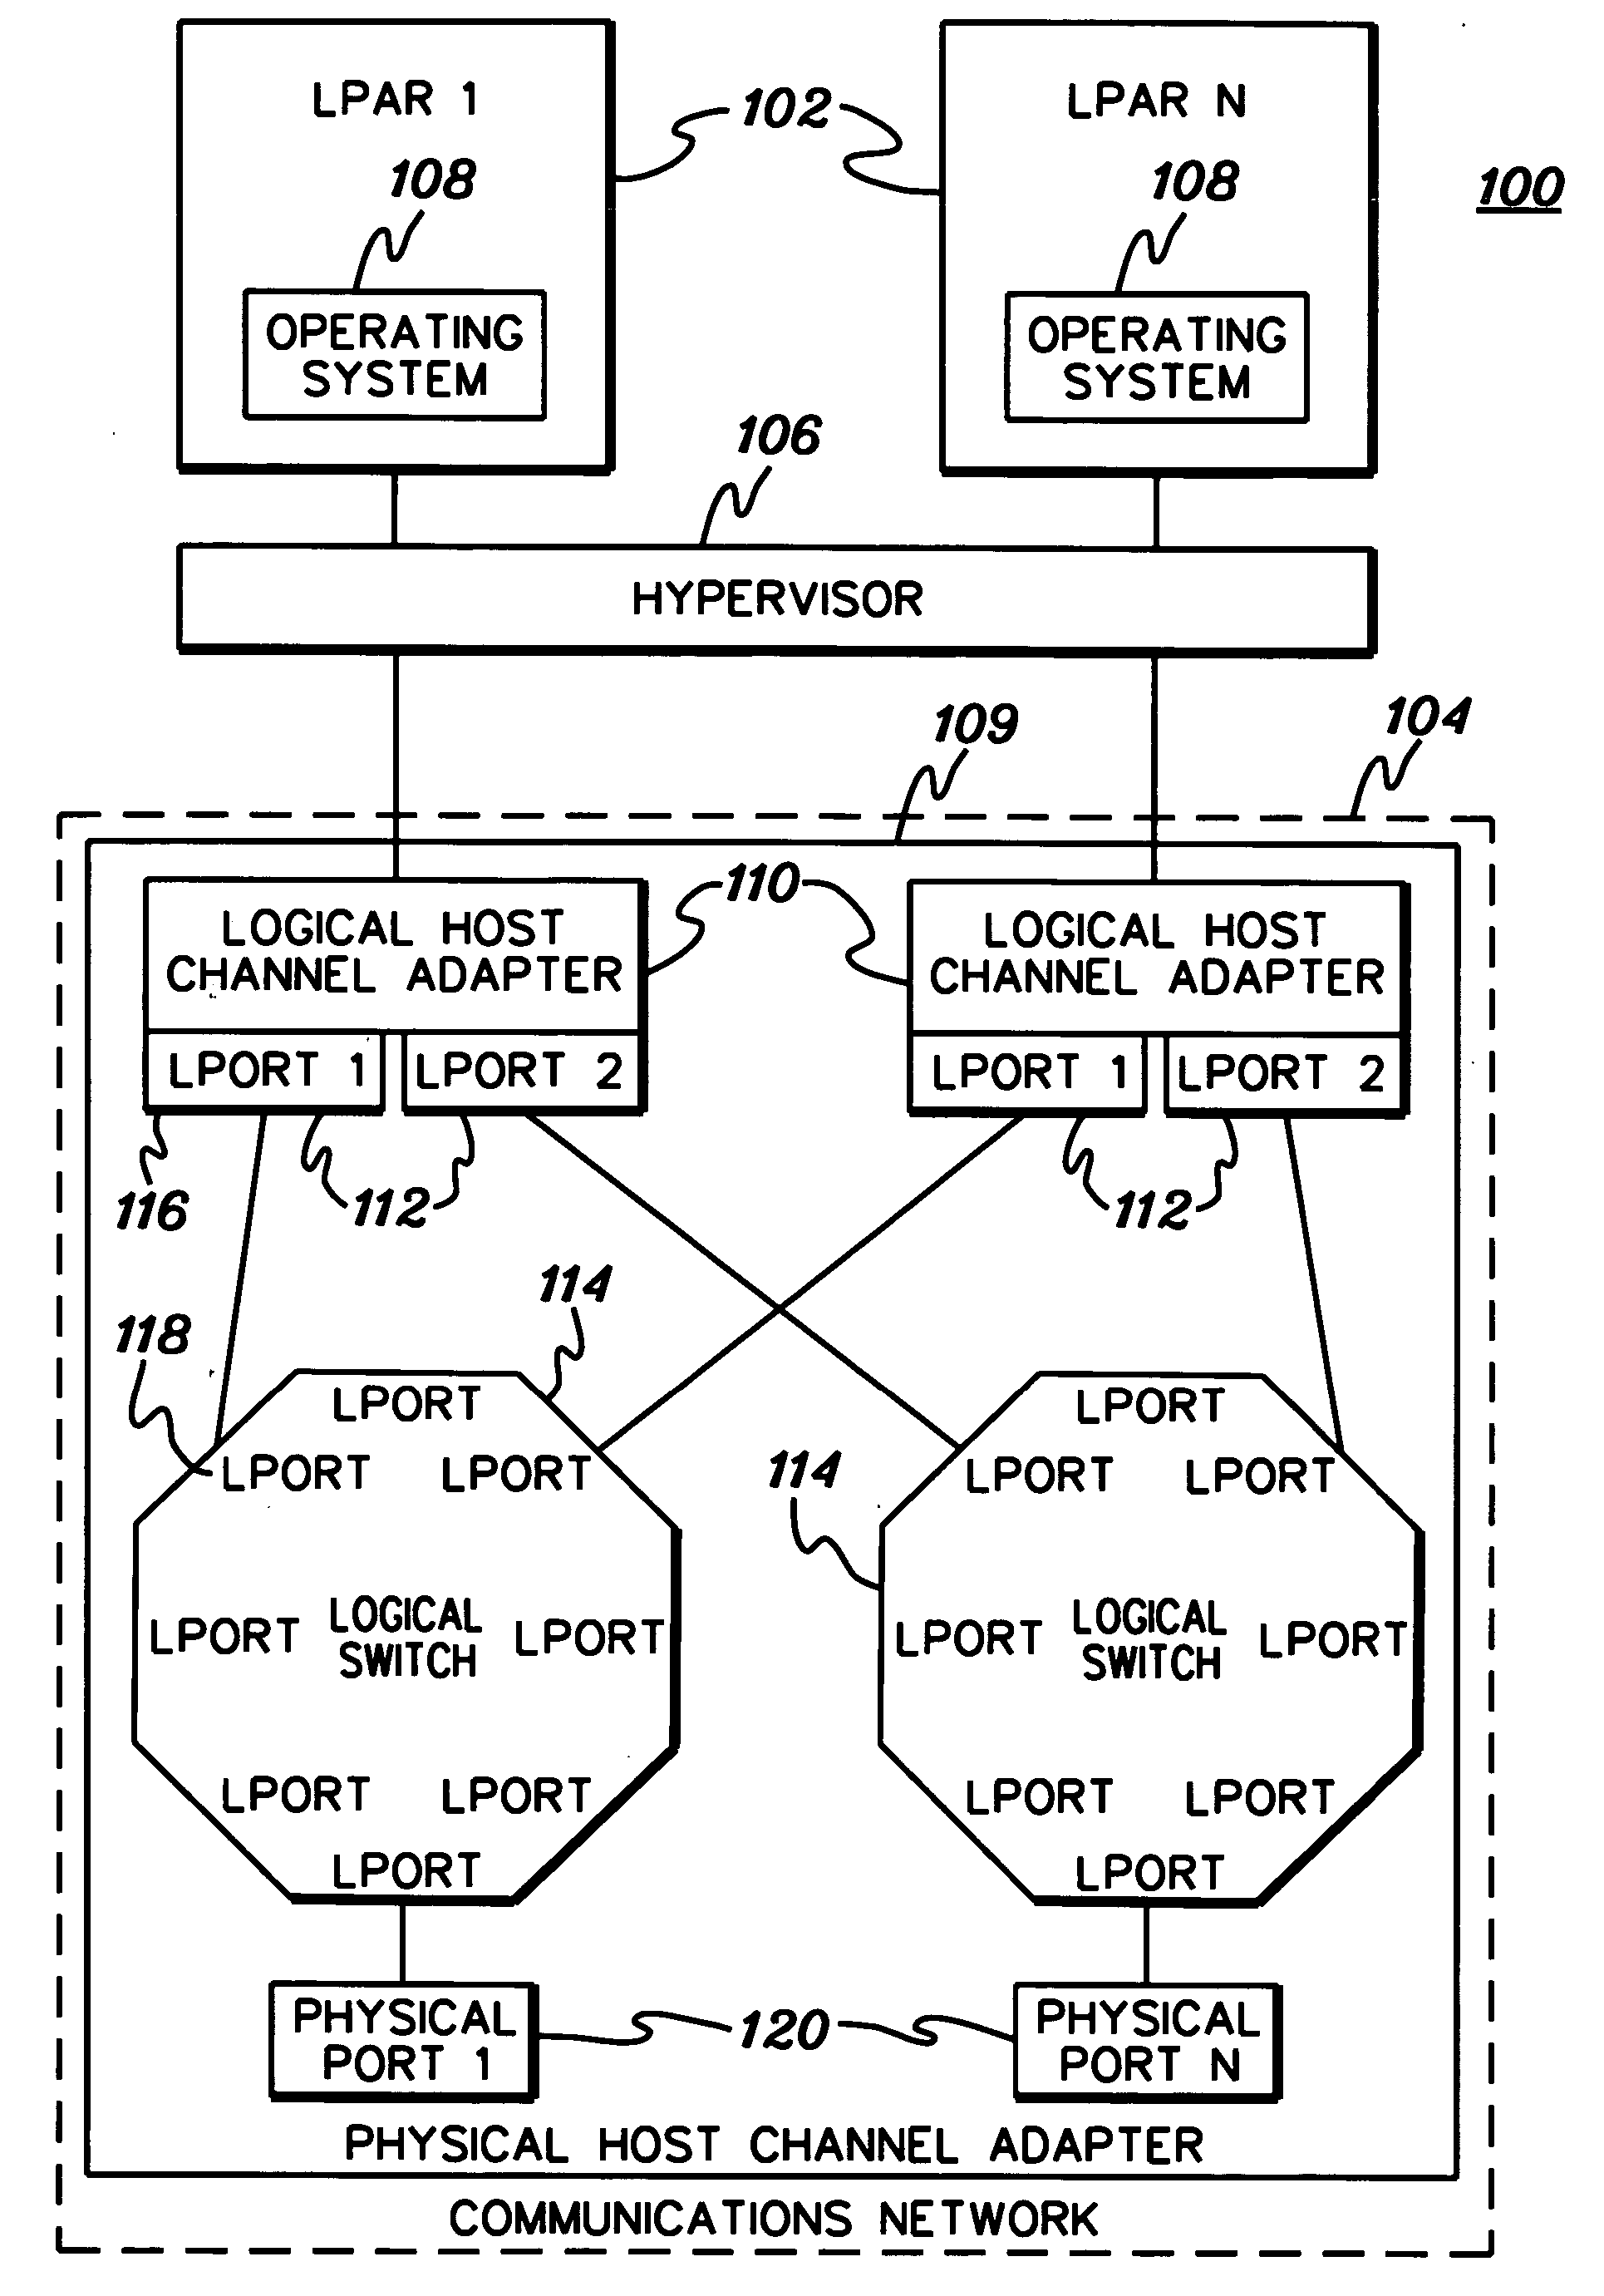 Performance counters for virtualized network interfaces of communications networks